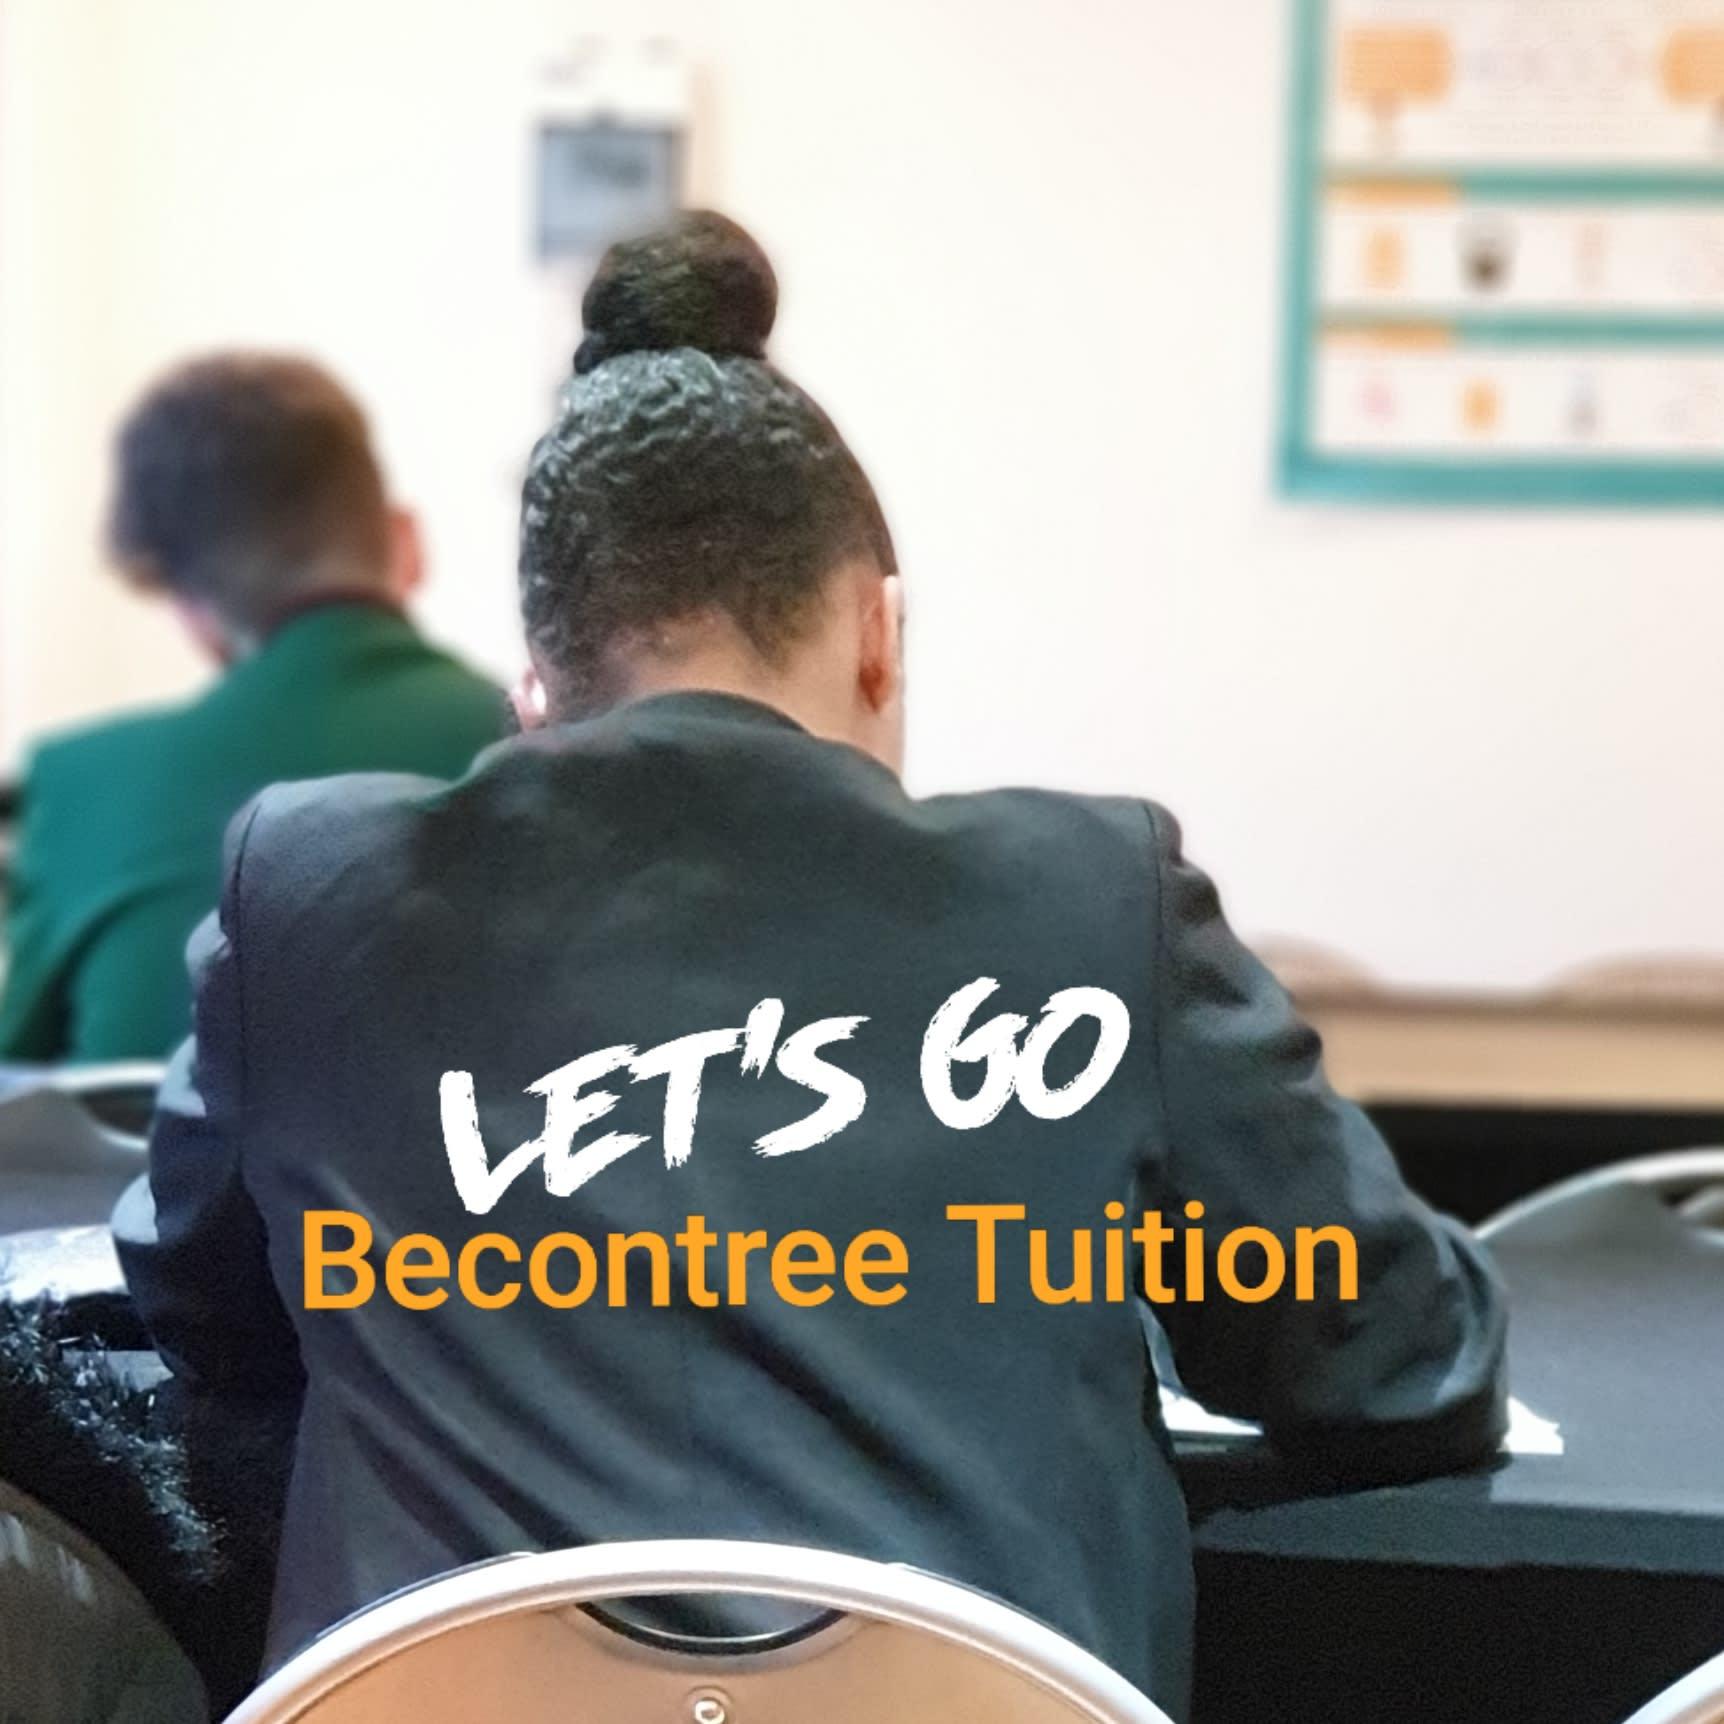 Product One To One Classes - Tutoring - Becontree Tuition | Dagenham Tutoring image